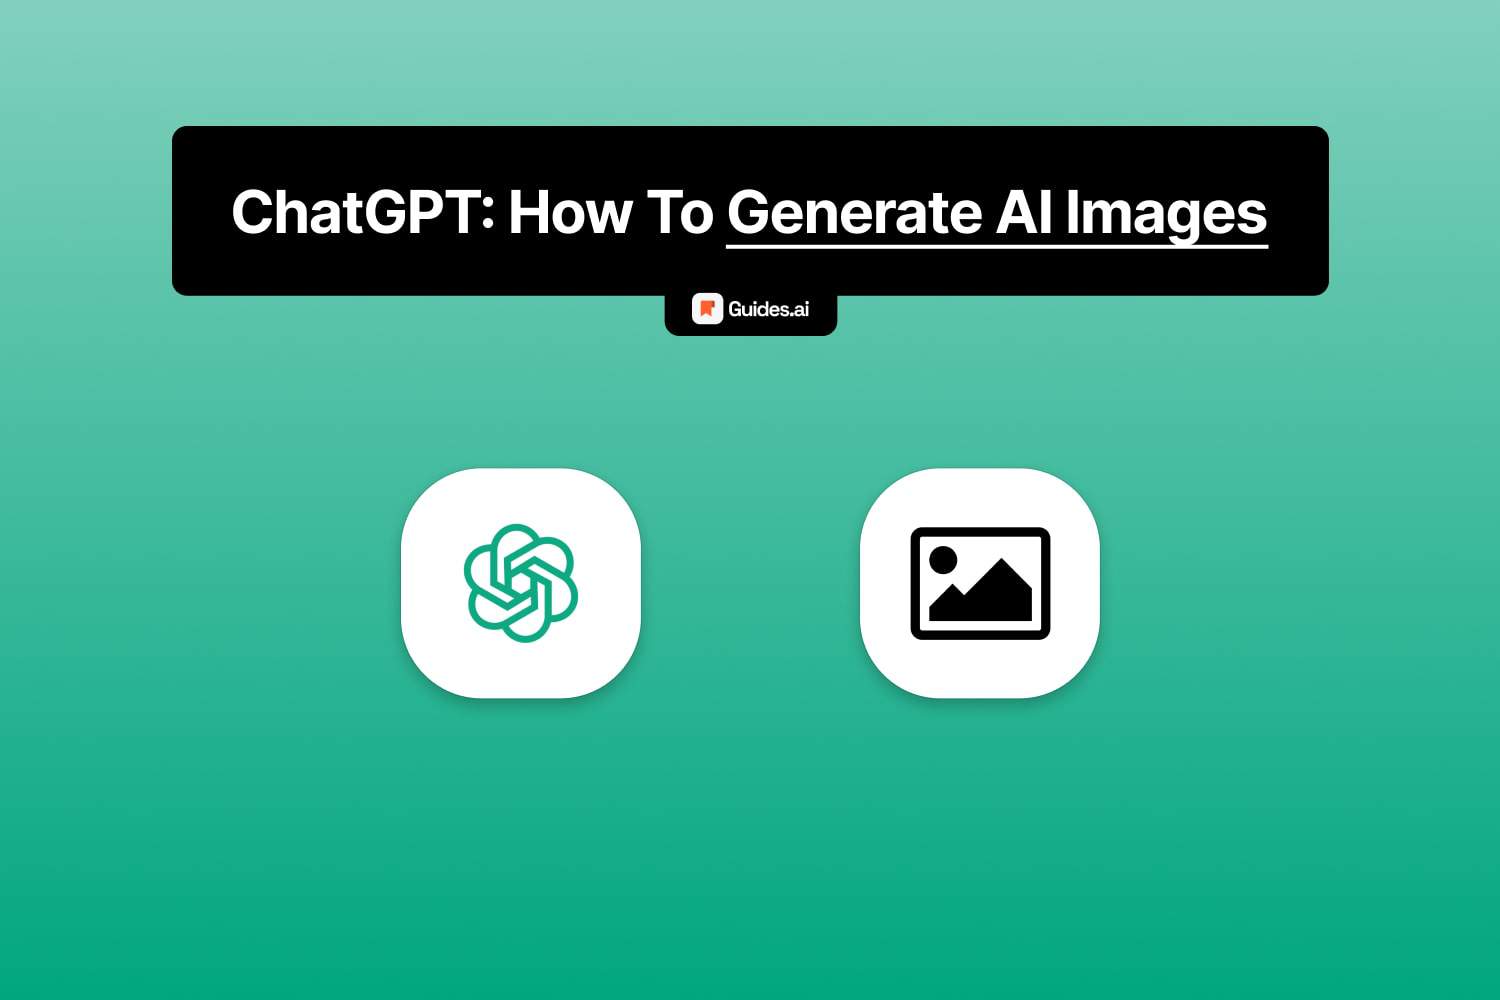 How to create images with ChatGPT